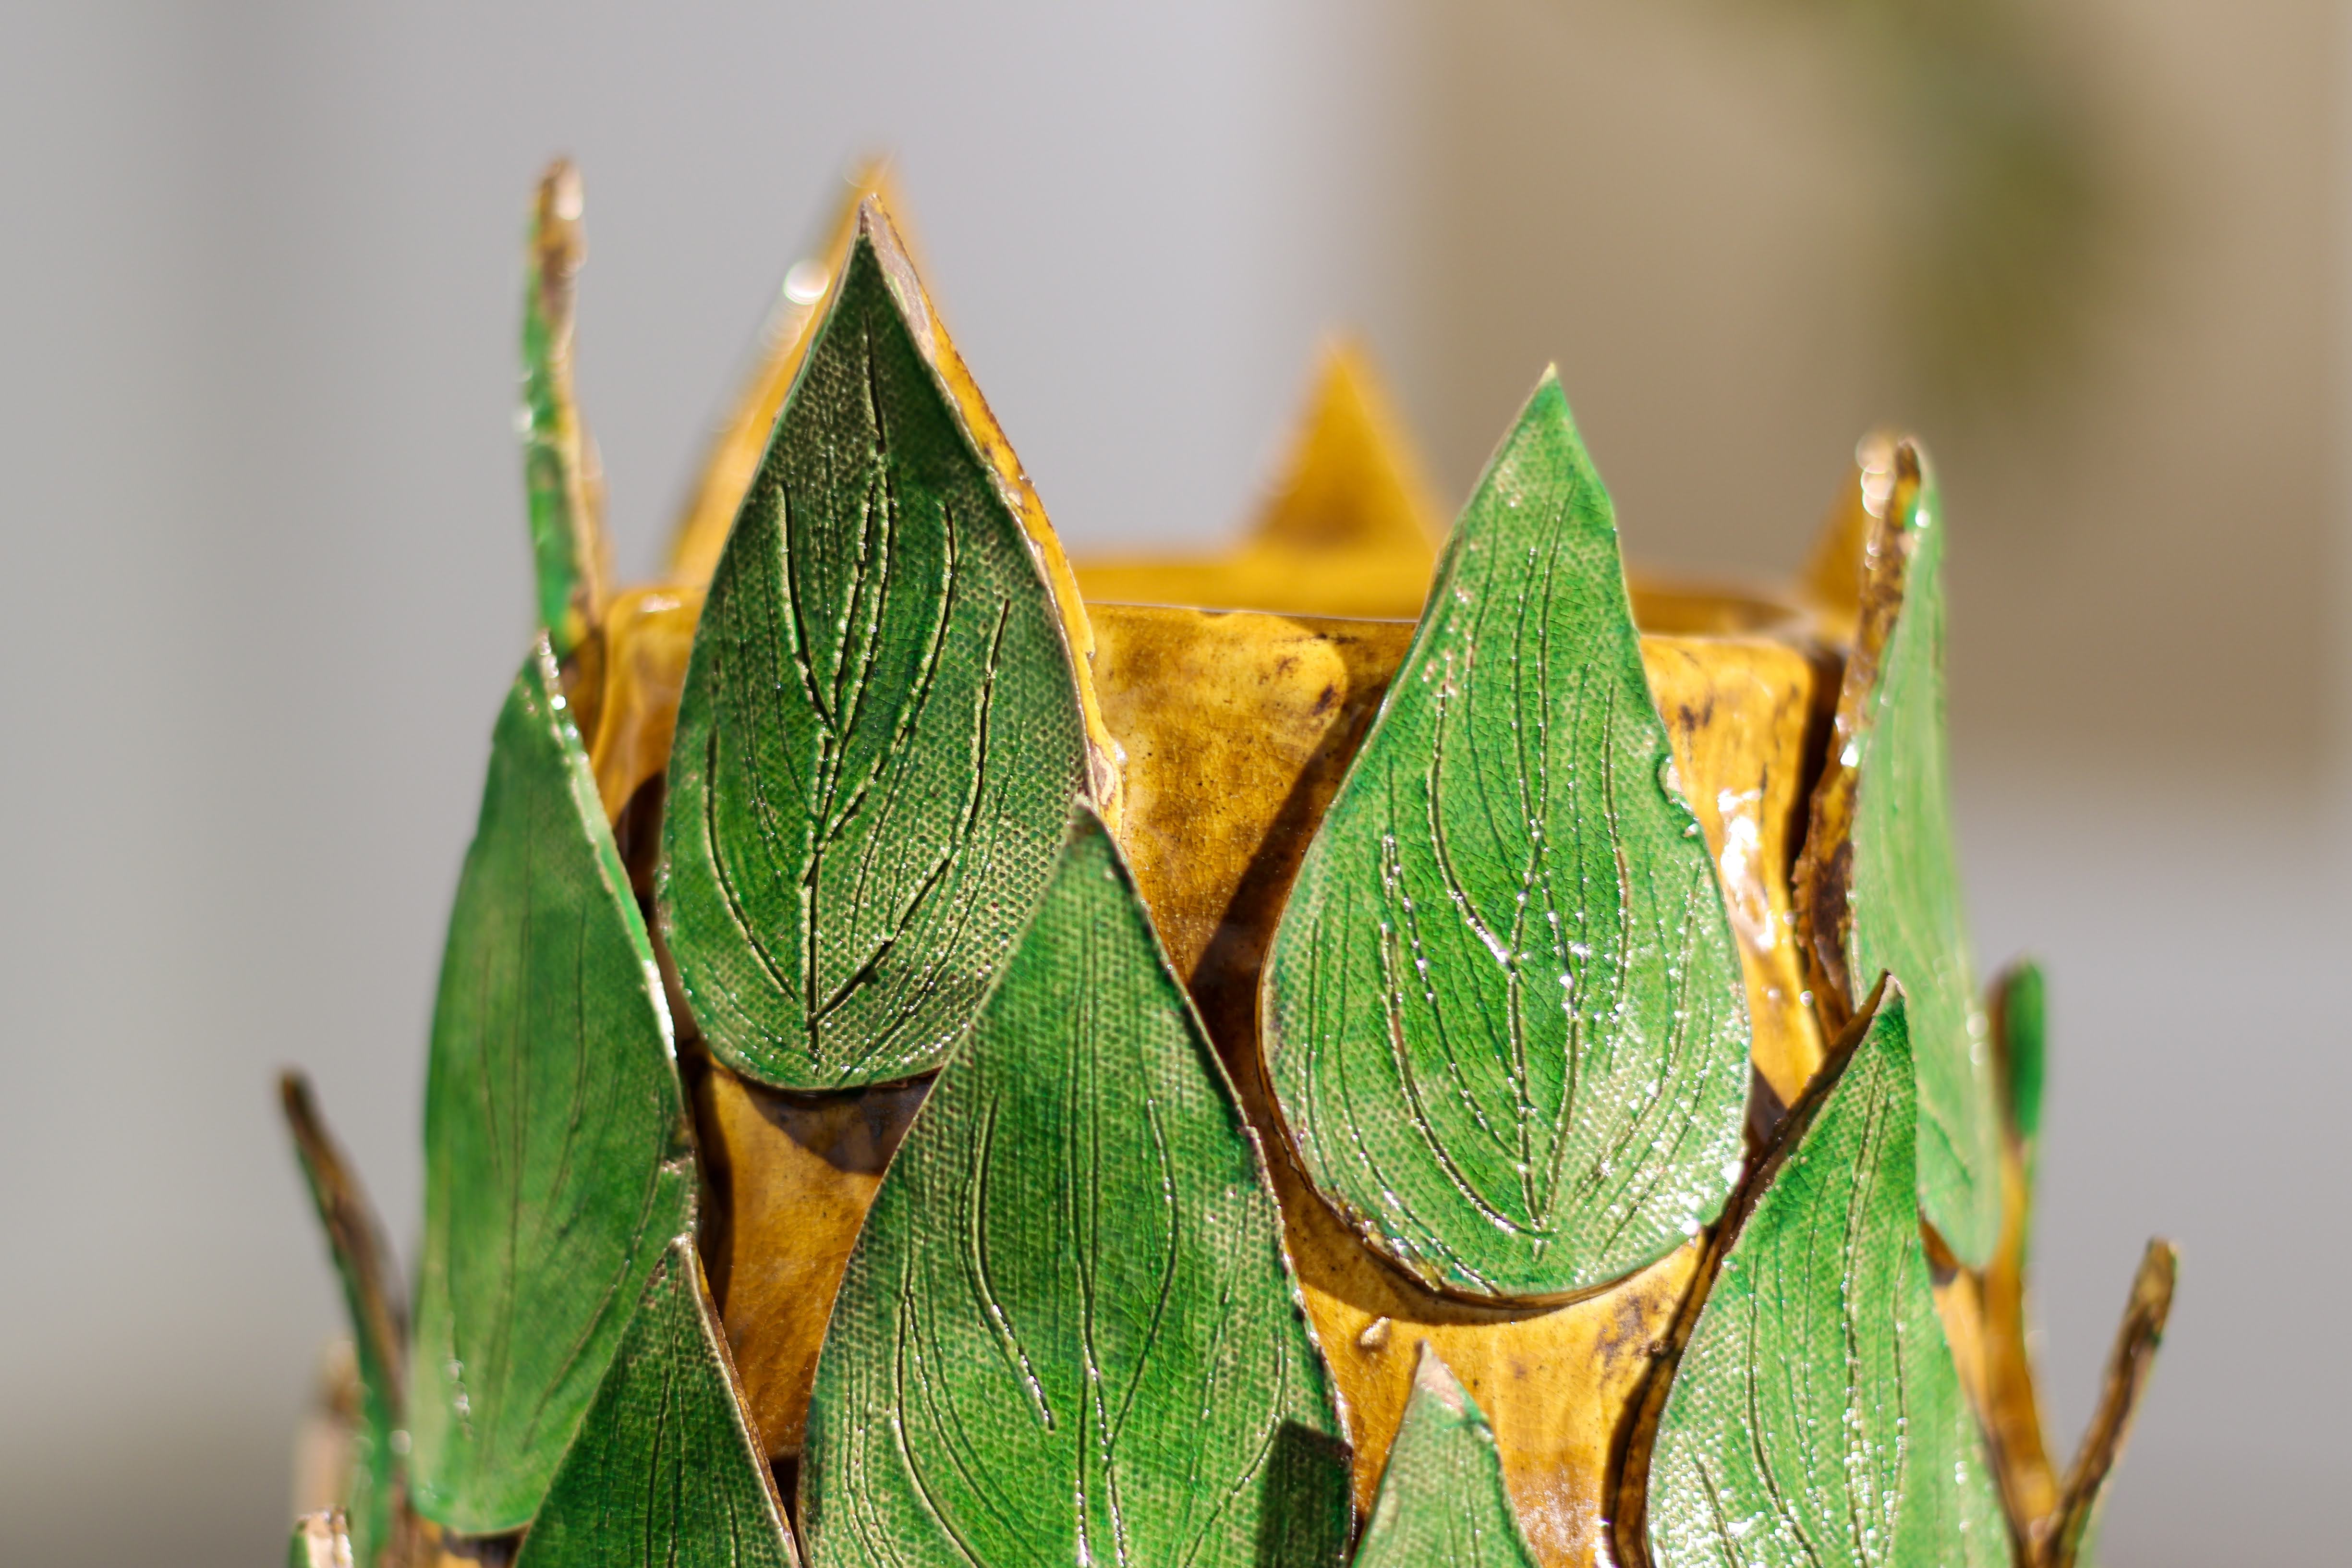 Yellow ceramic sculpture covered with green ceramic leaves from the 2021 Undergraduate Art Exhibition 